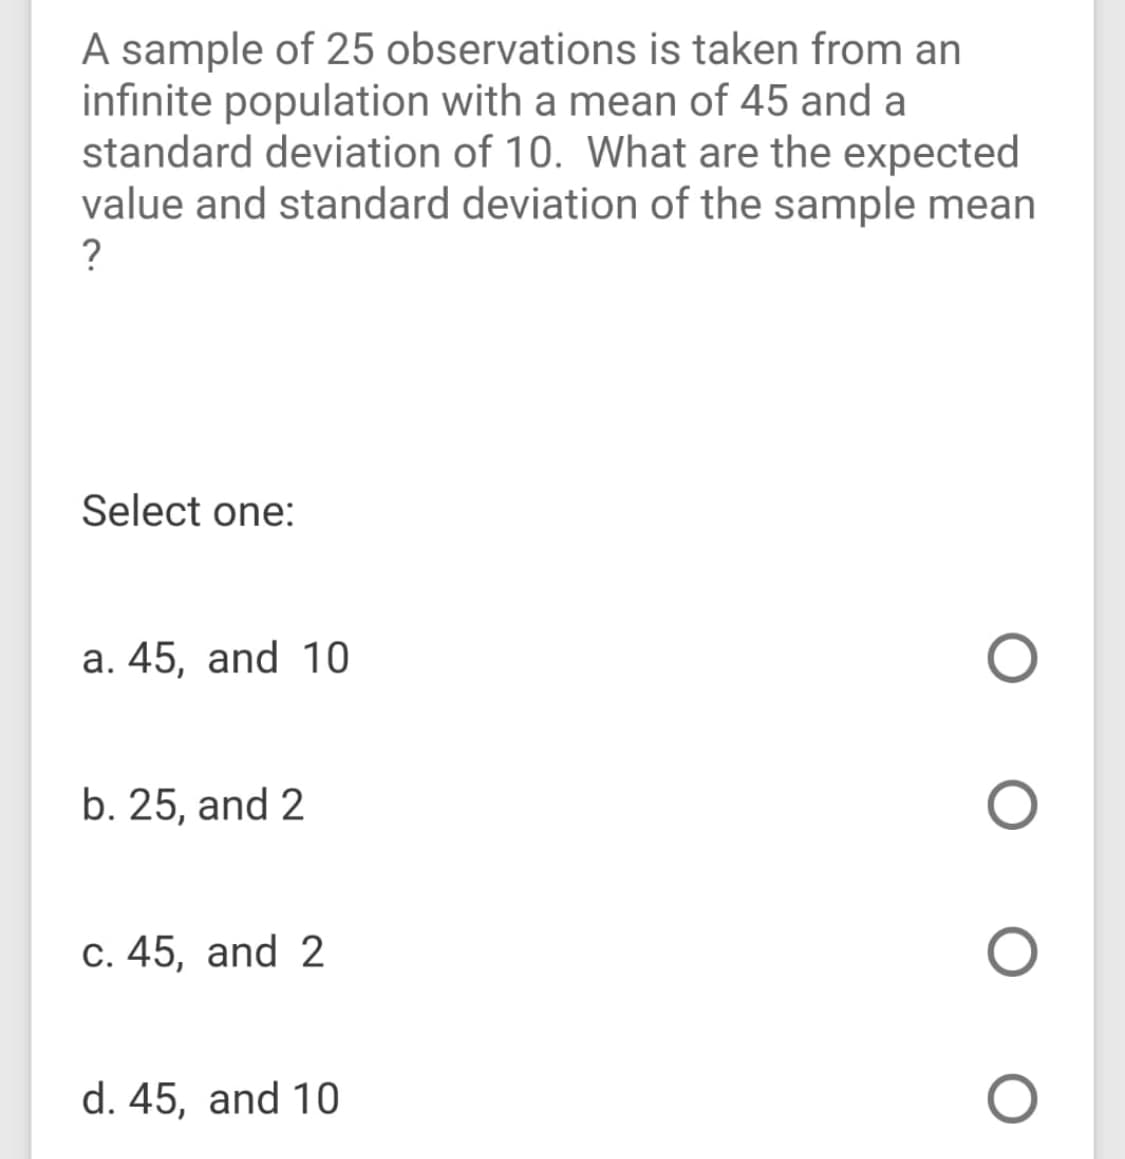 A sample of 25 observations is taken from an
infinite population with a mean of 45 and a
standard deviation of 10. What are the expected
value and standard deviation of the sample mean
